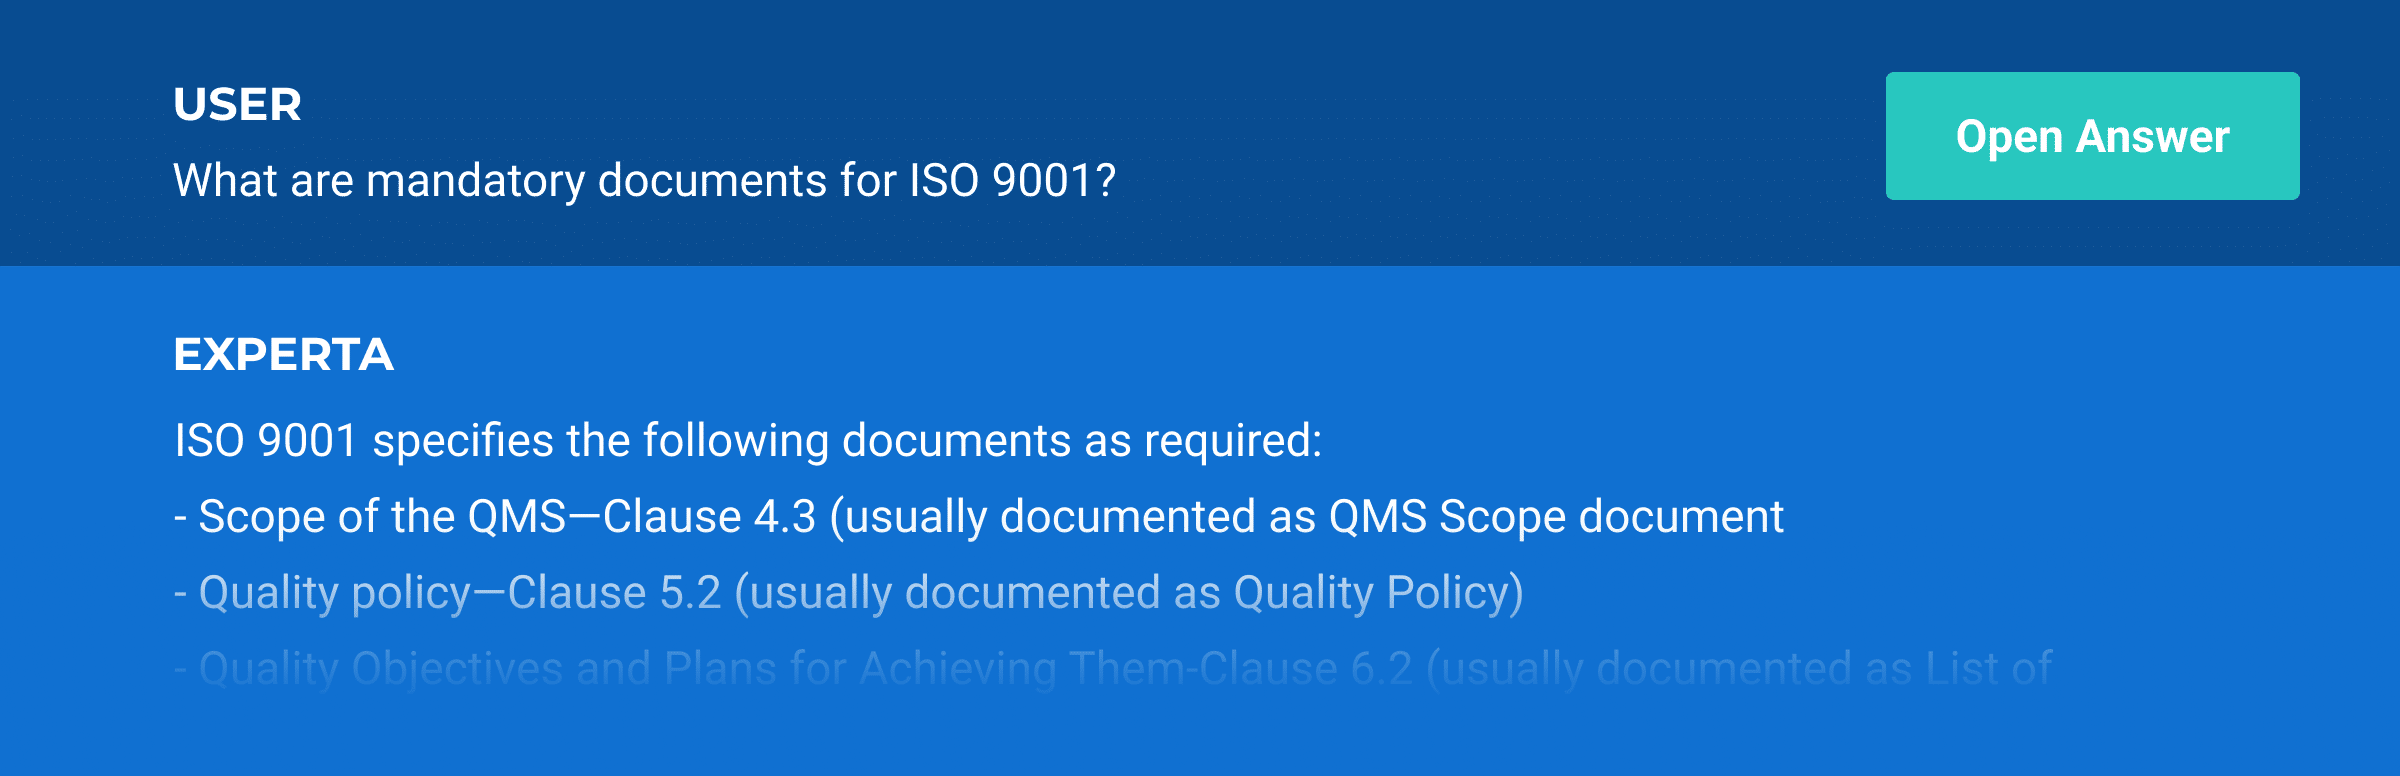 How to implement ISO 9001 using generative AI - Advisera